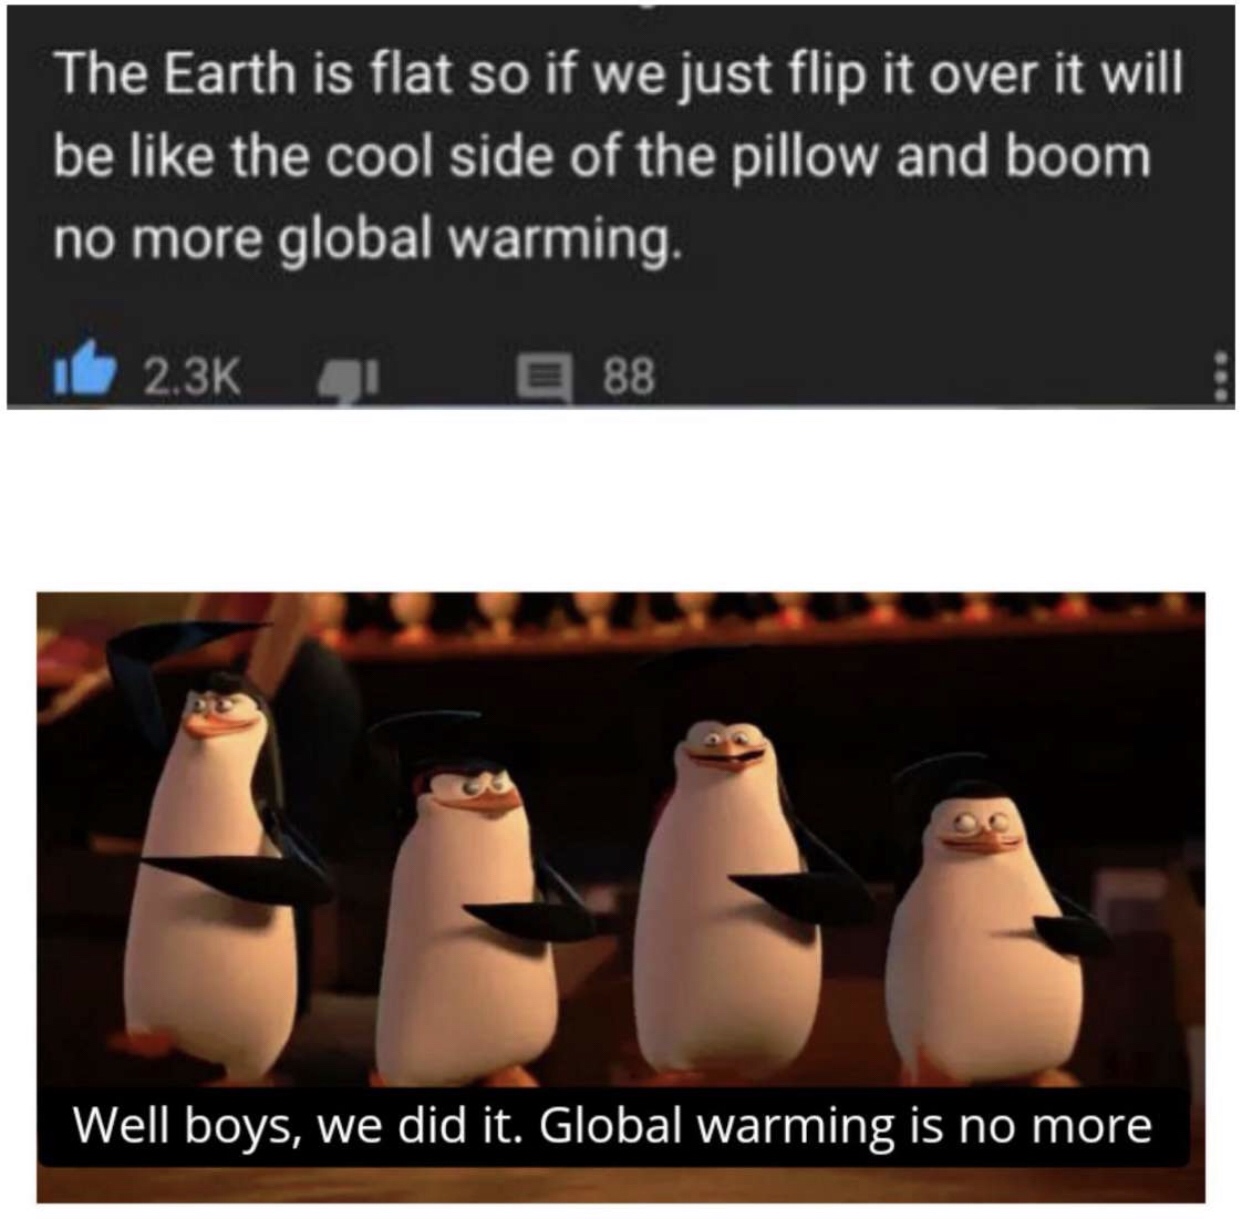 funny global warming memes - The Earth is flat so if we just flip it over it will be the cool side of the pillow and boom no more global warming. 88 Well boys, we did it. Global warming is no more